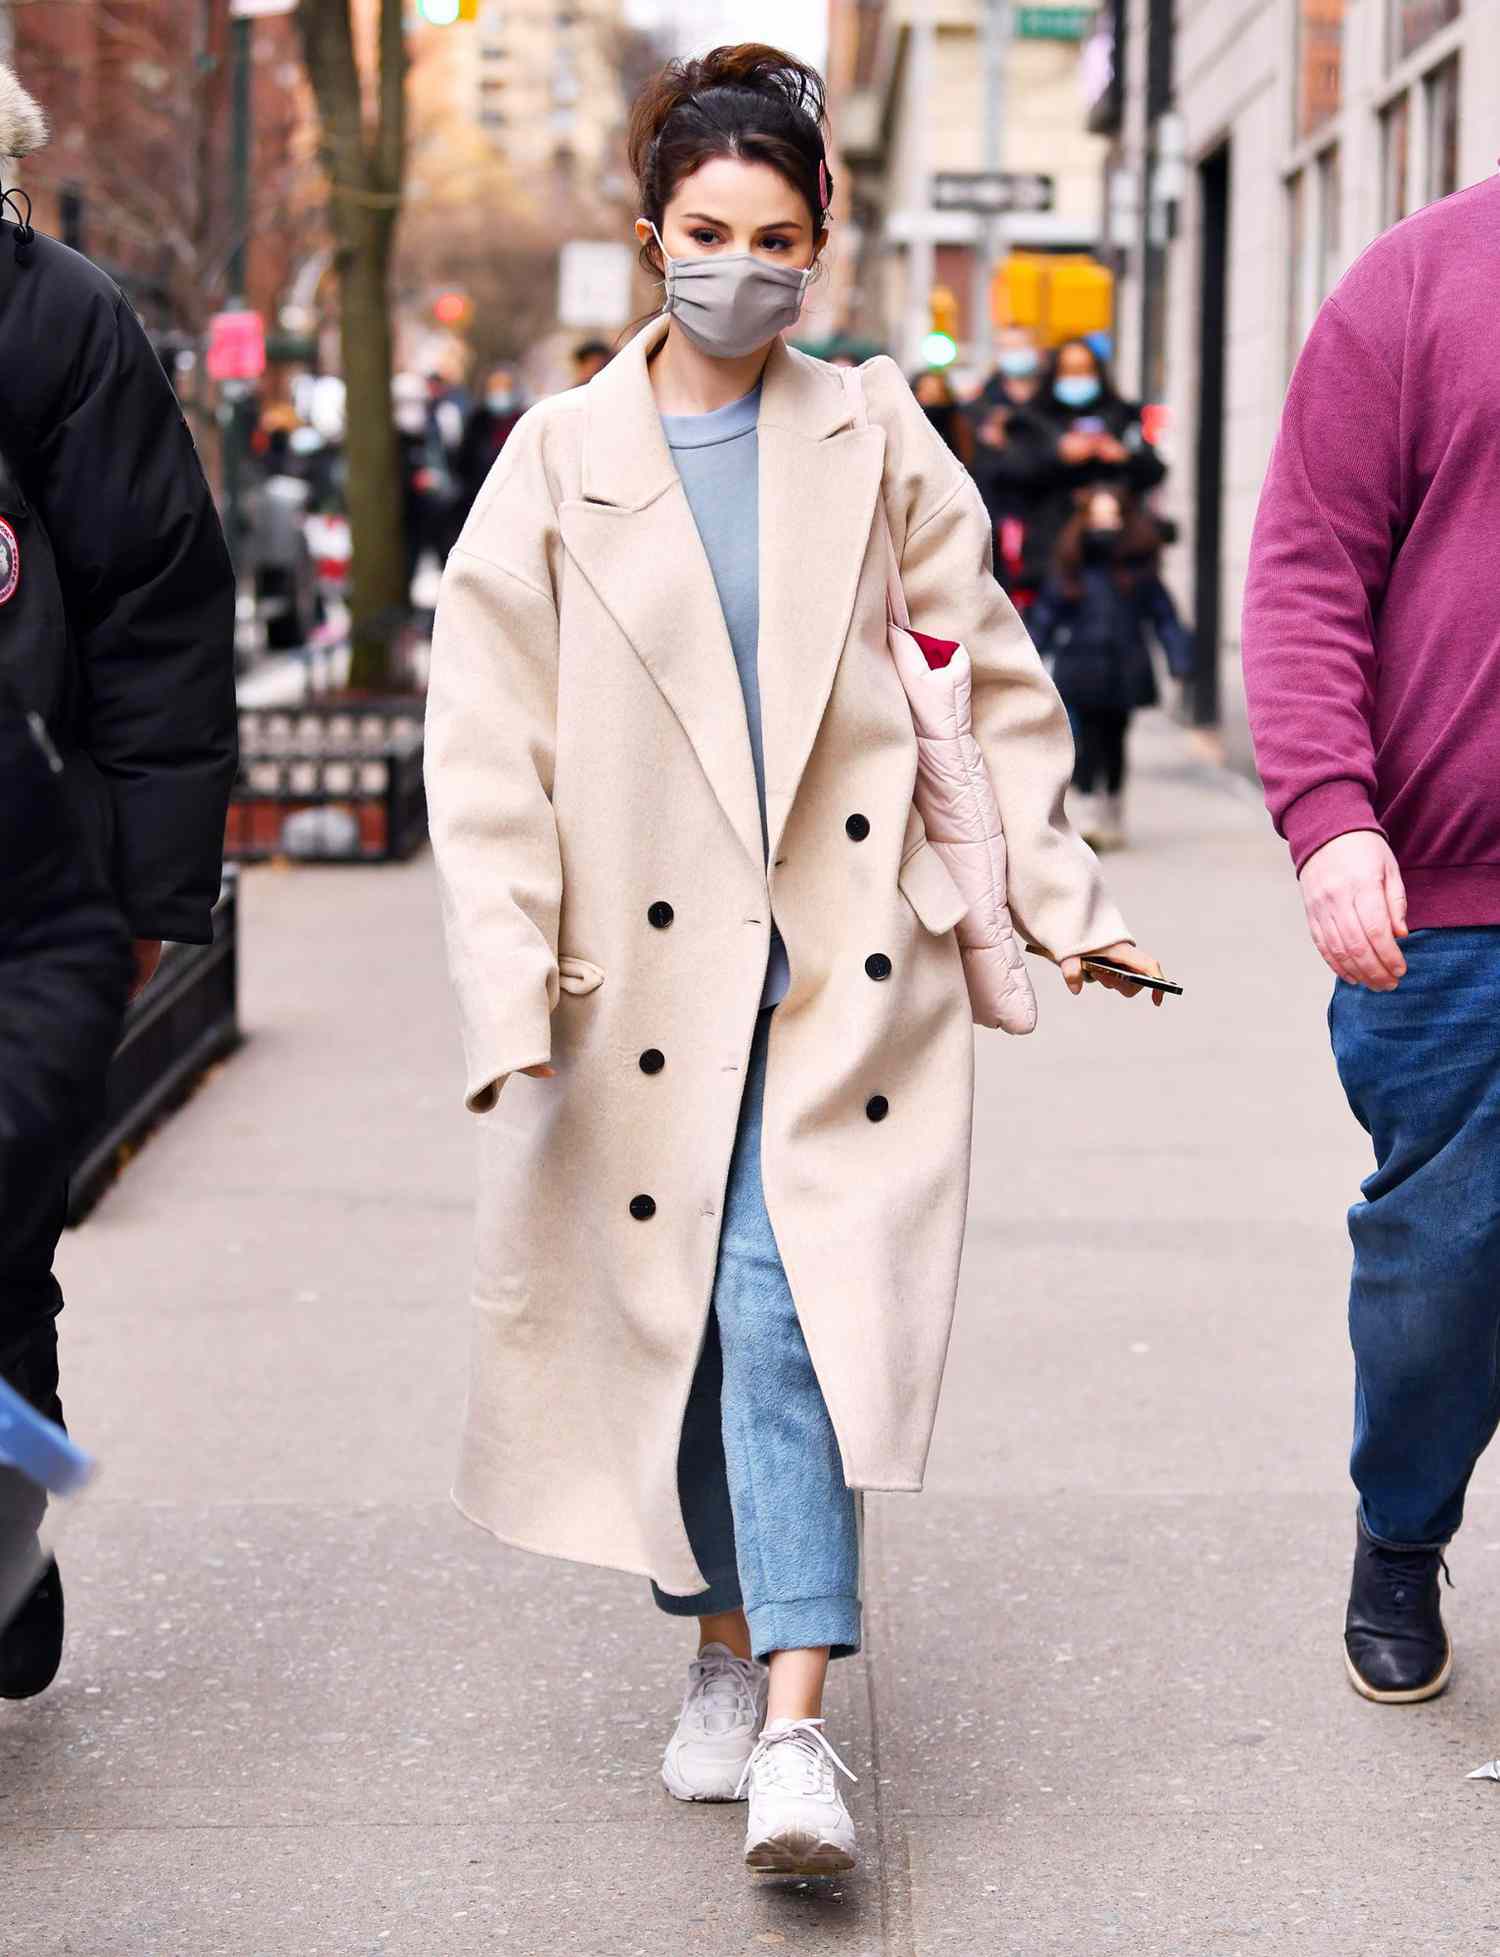 Selena Gomez is seen on the set of 'Only Murders in the Building' in Manhattan on January 17, 2021 in New York City